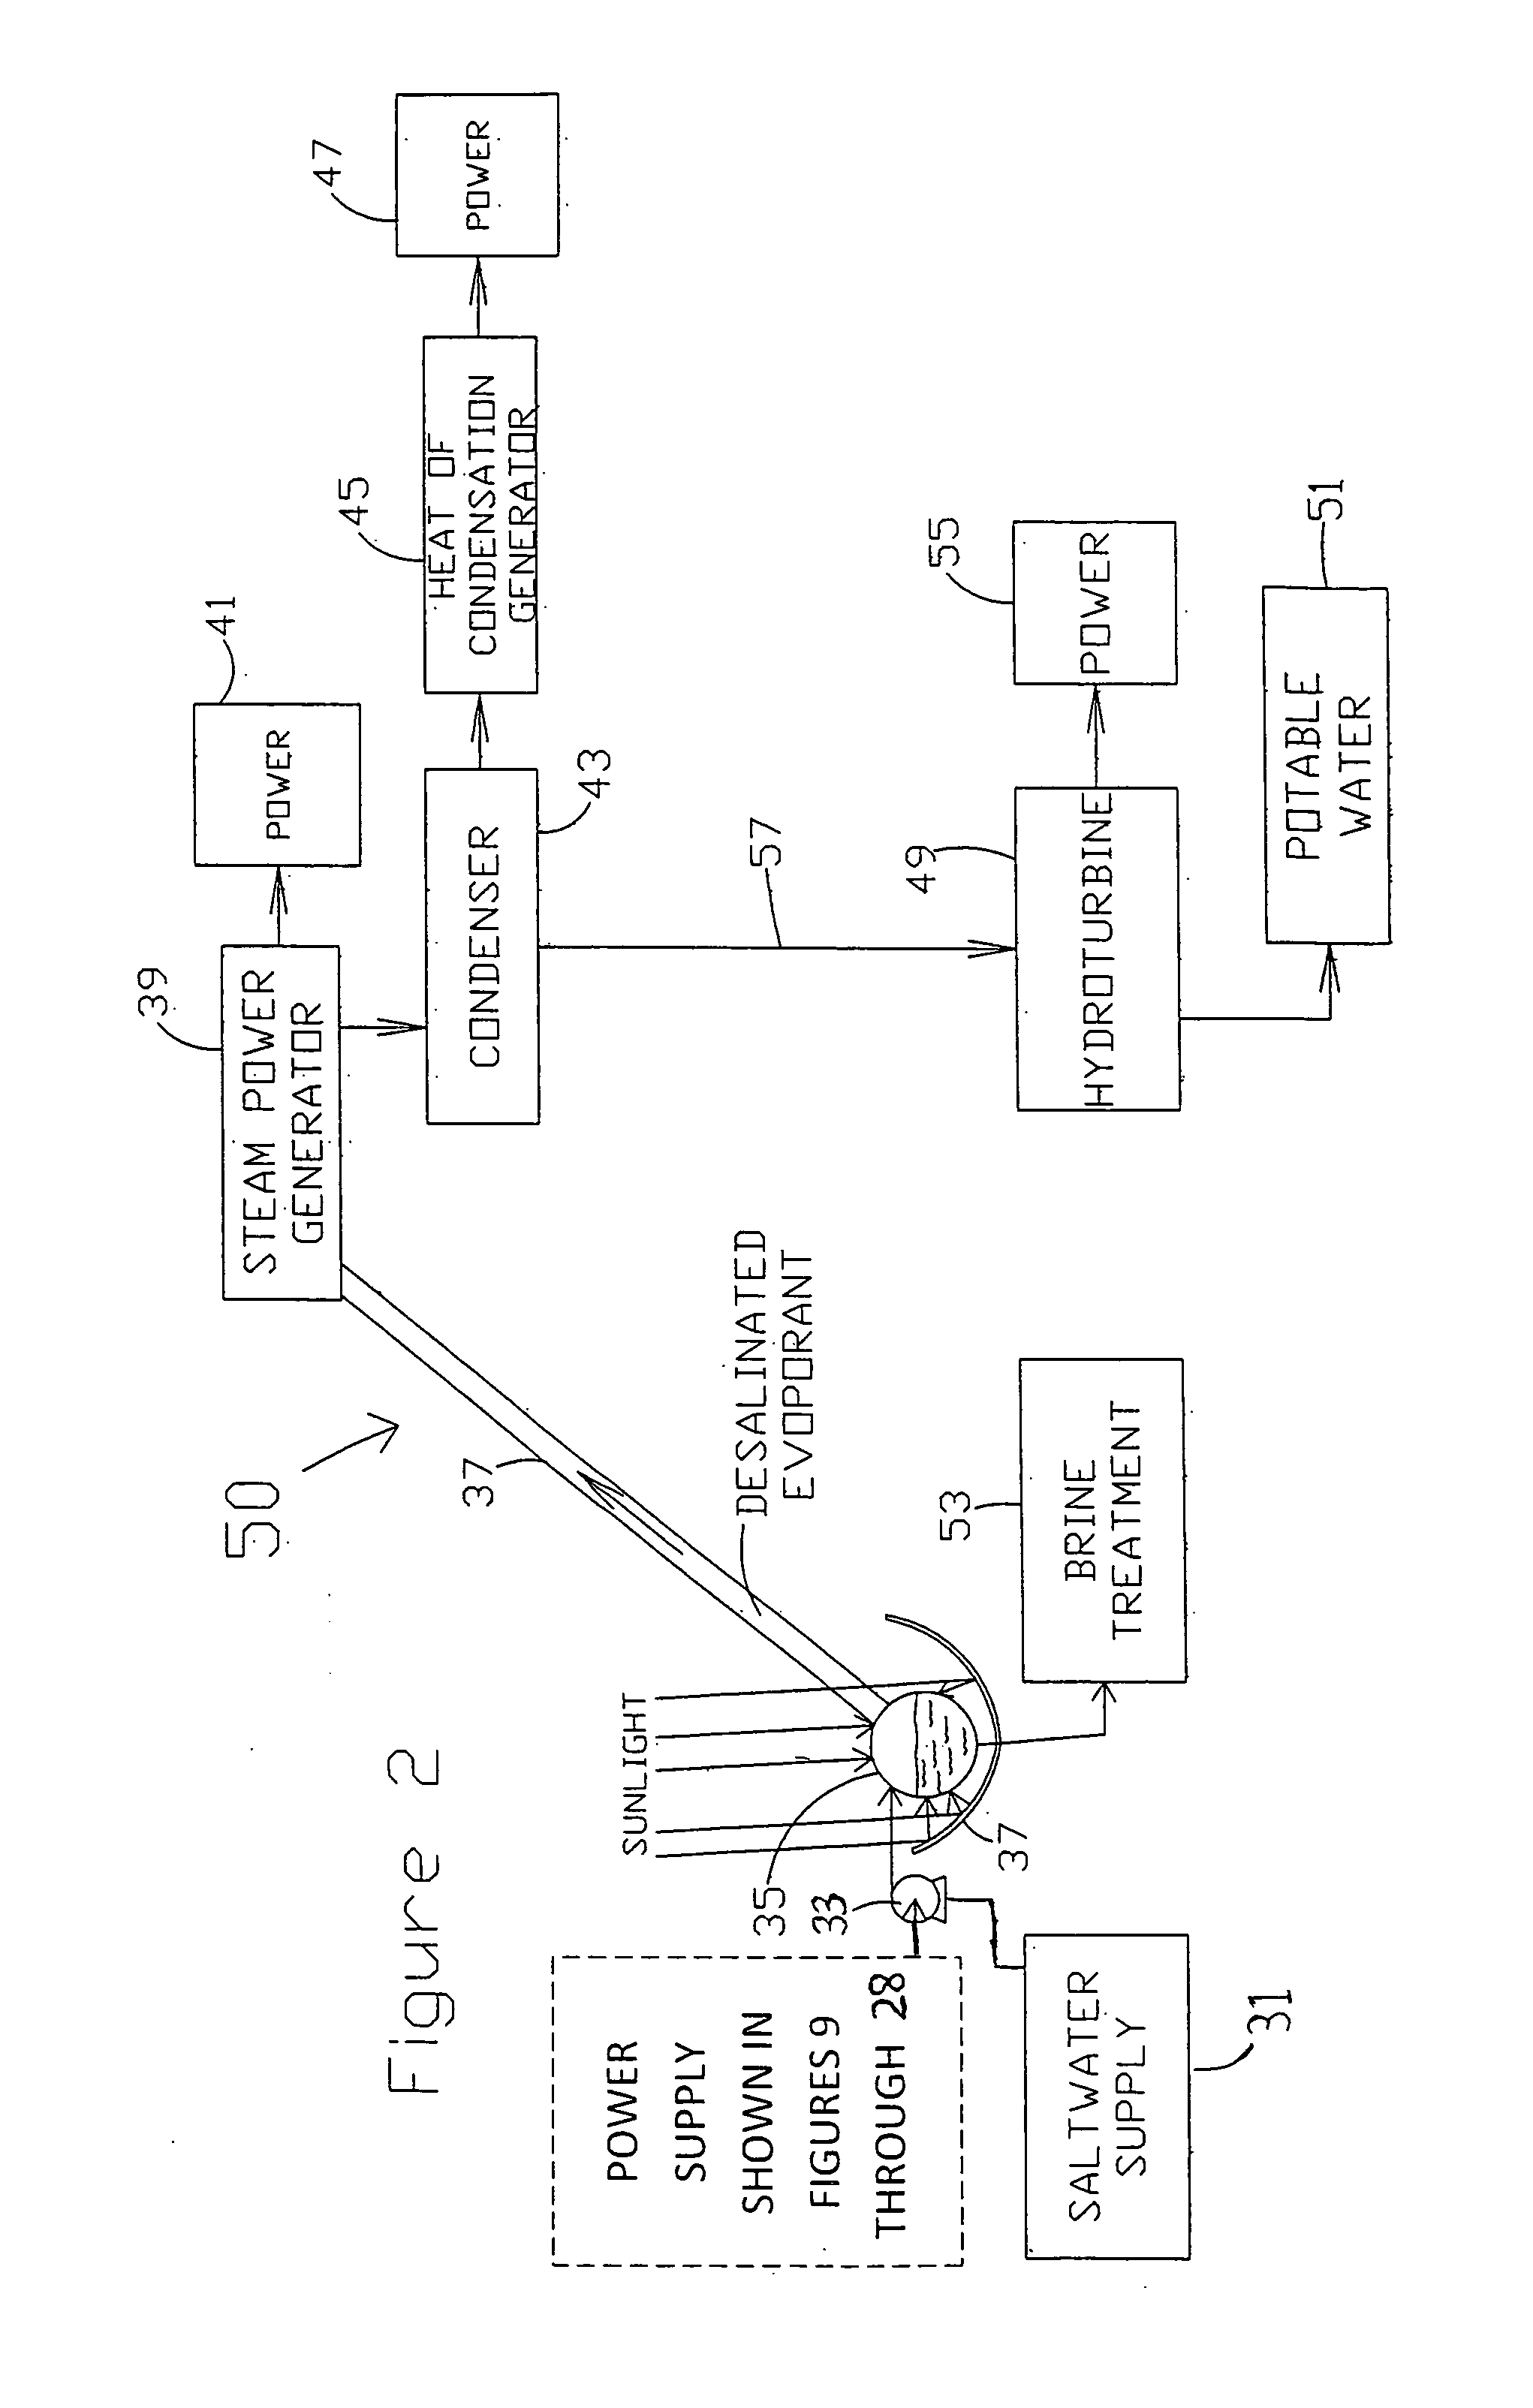 Solar desalination system with reciprocating solar engine pumps